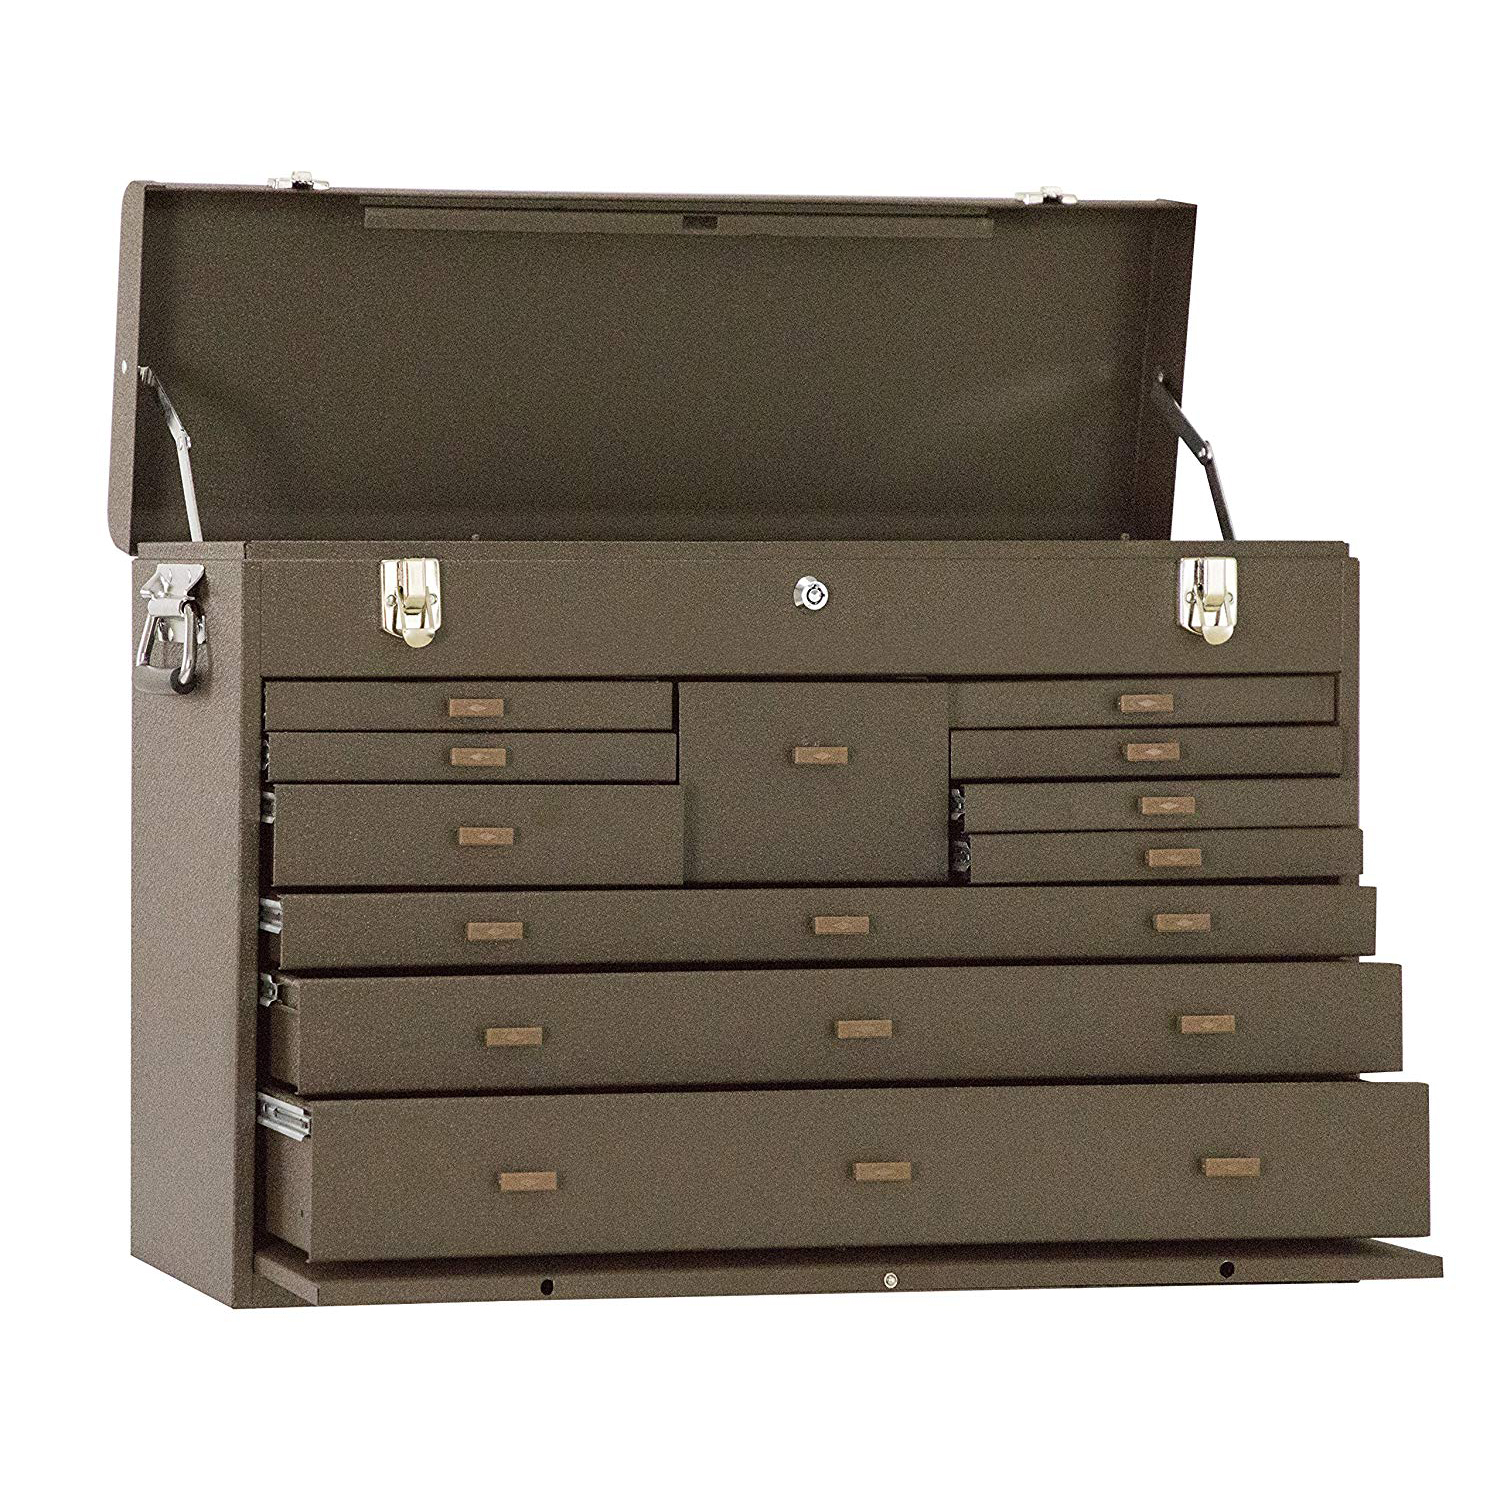 MACHINIST CHEST 26in 52611B 11-DRAWER BROWN WRINKLE